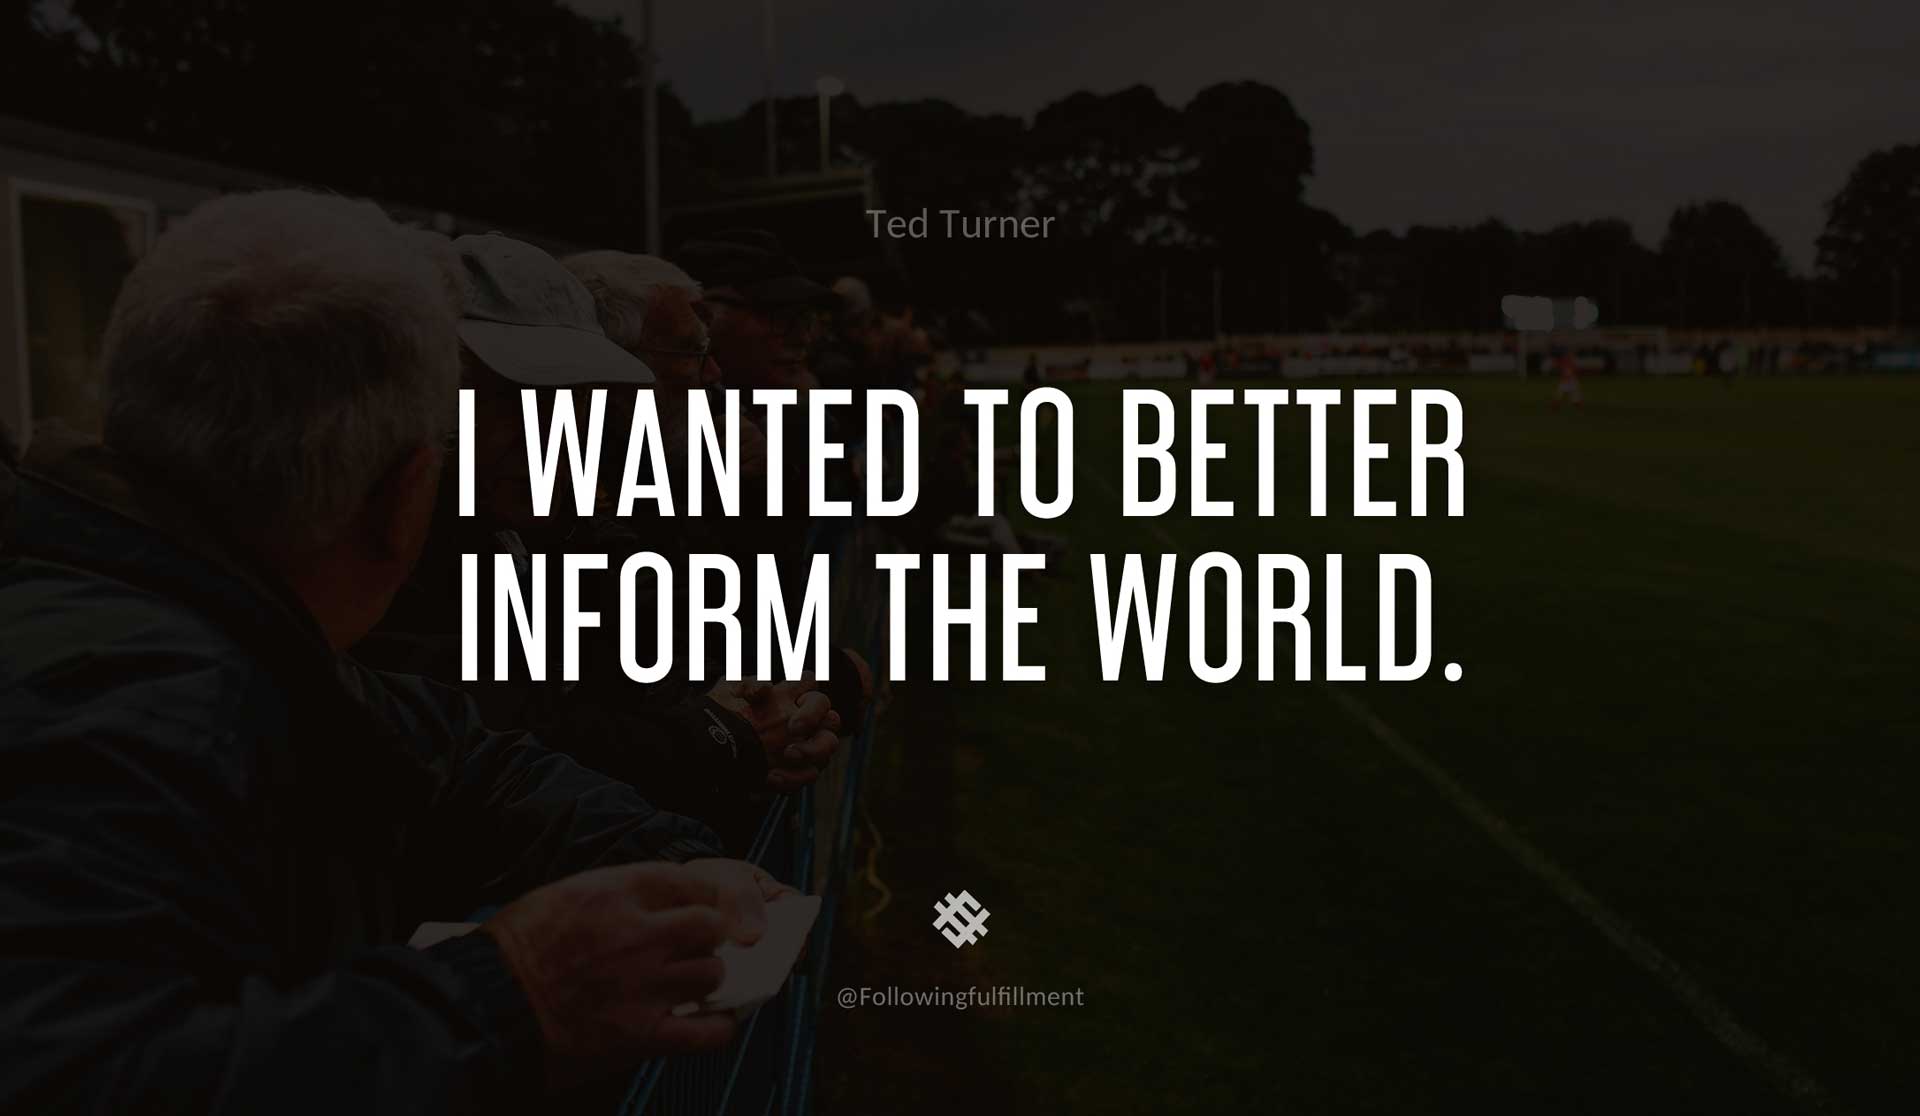 I-wanted-to-better-inform-the-world.-TED-TURNER-Quote.jpg